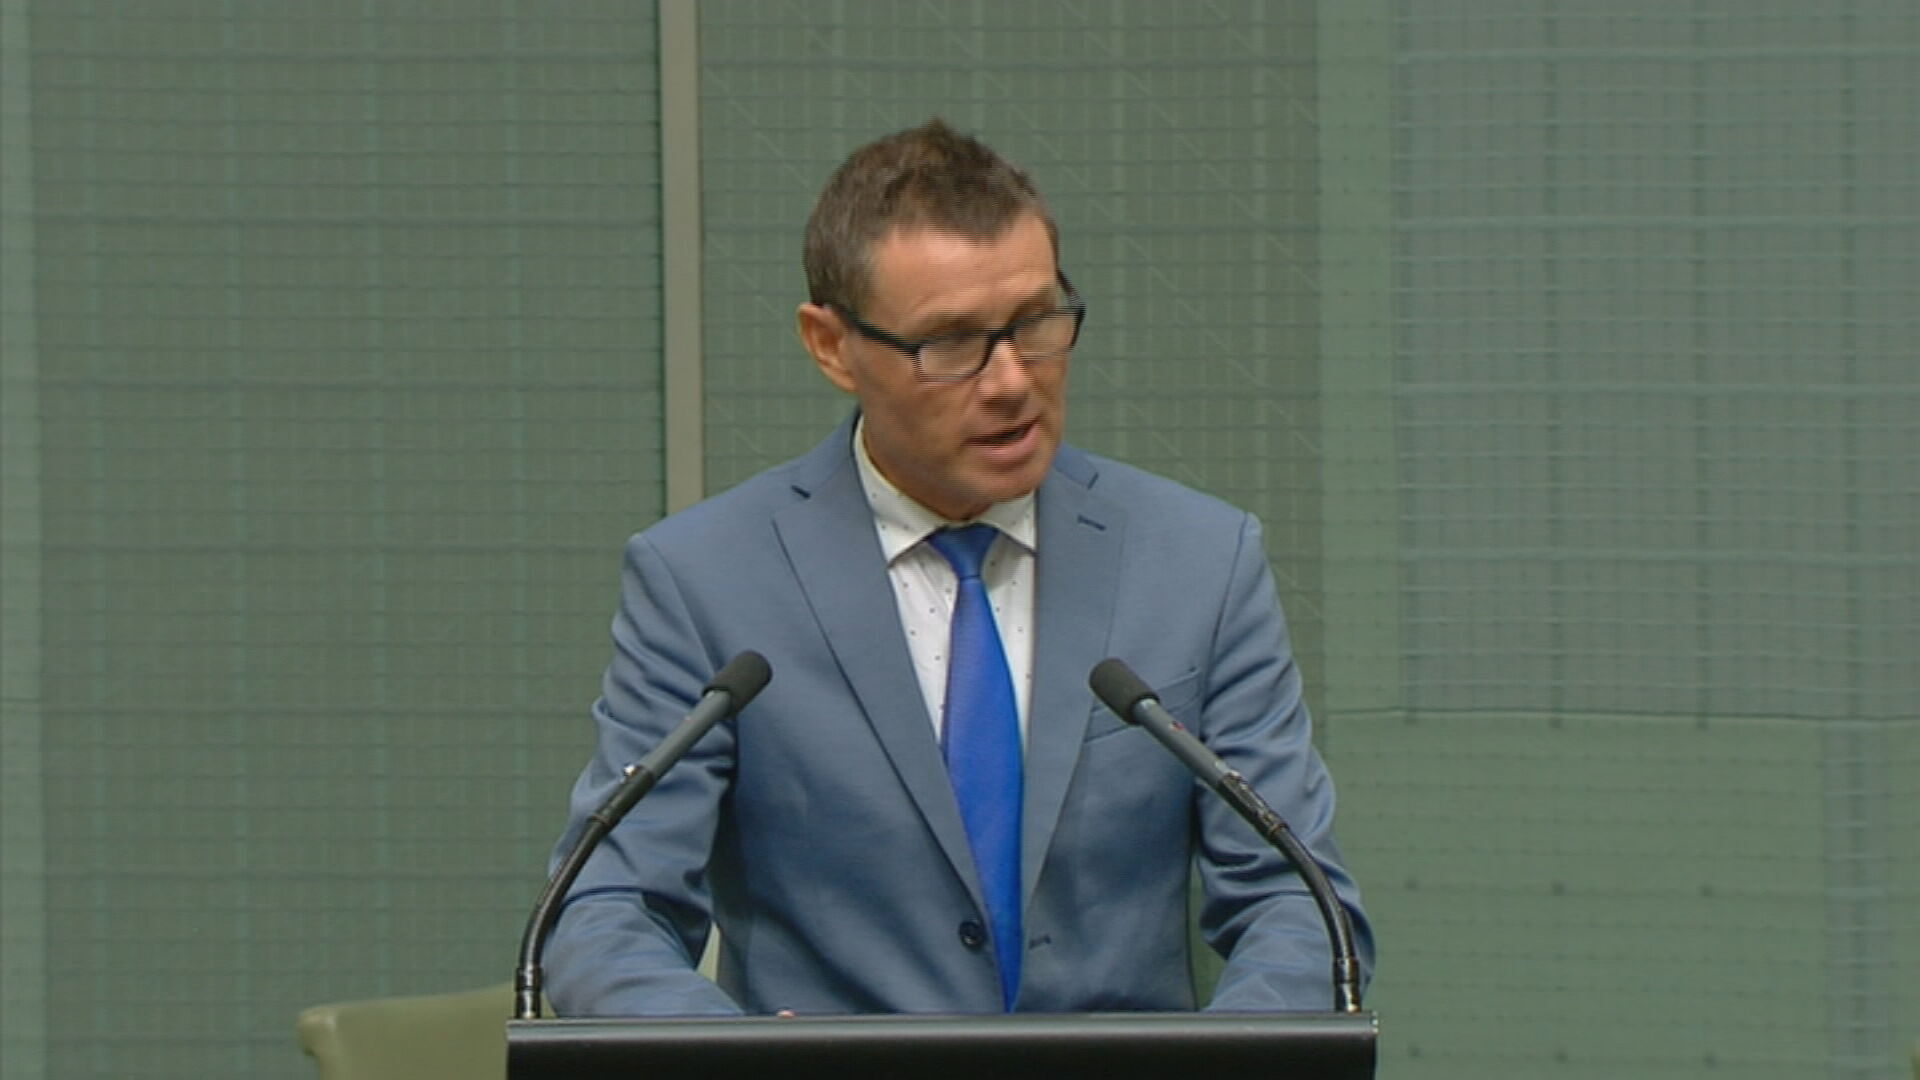 Andrew Laming MP apology in Parliament House